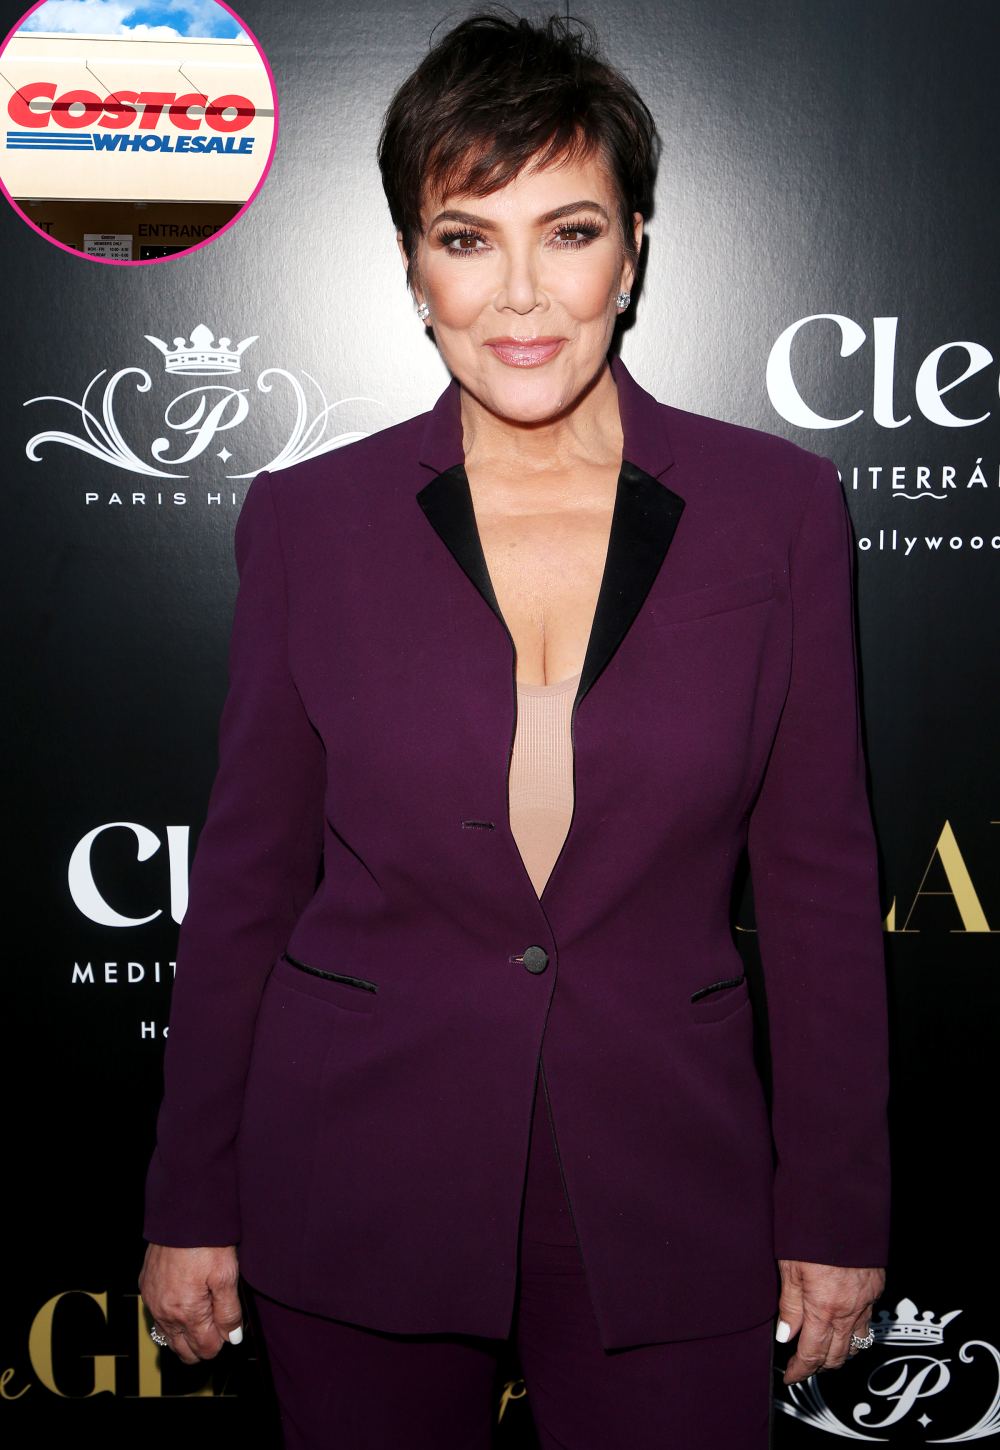 Kris Jenner Syas Costco Is Her ‘Favorite Store’